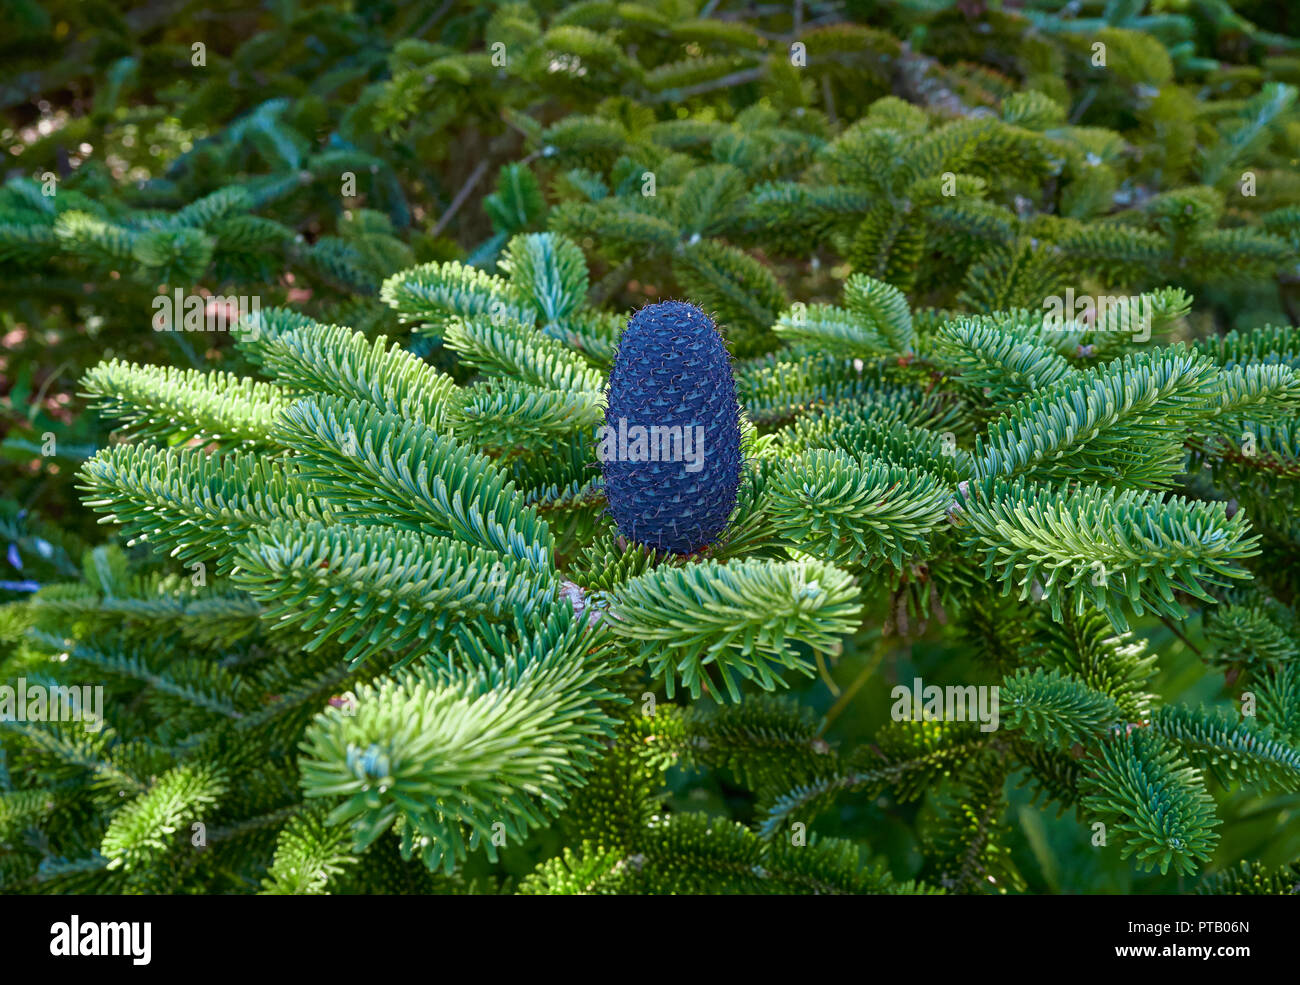 A Fir Conesof the Delavays Fir, Abies delavayi standing upright on the branches of the Tree at the St Andrews Botanic Gardens in Fife, Scotland. Stock Photo